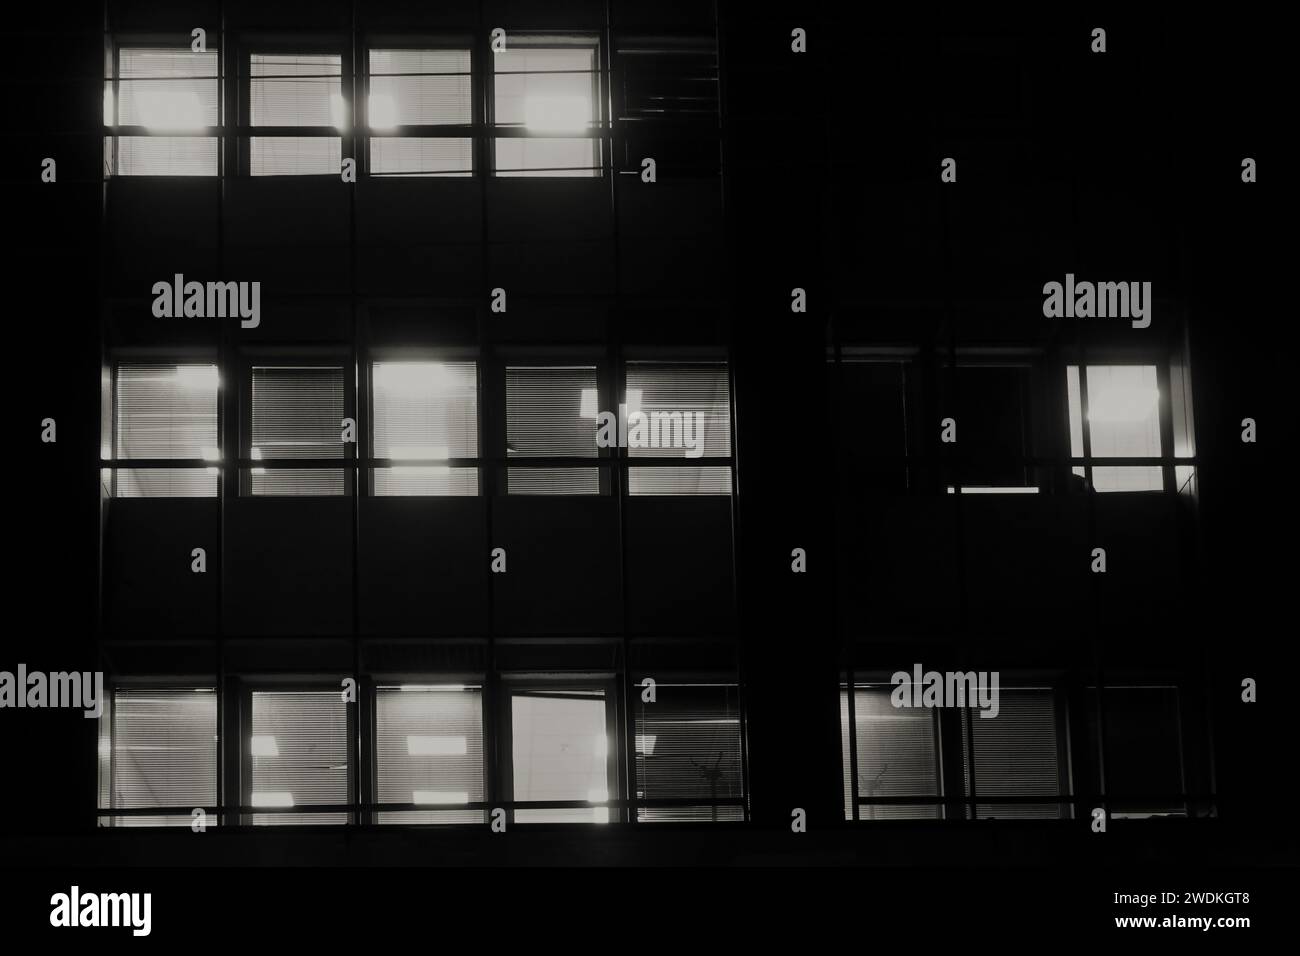 Office building facade windows with venetian blinds at night. Stock Photo